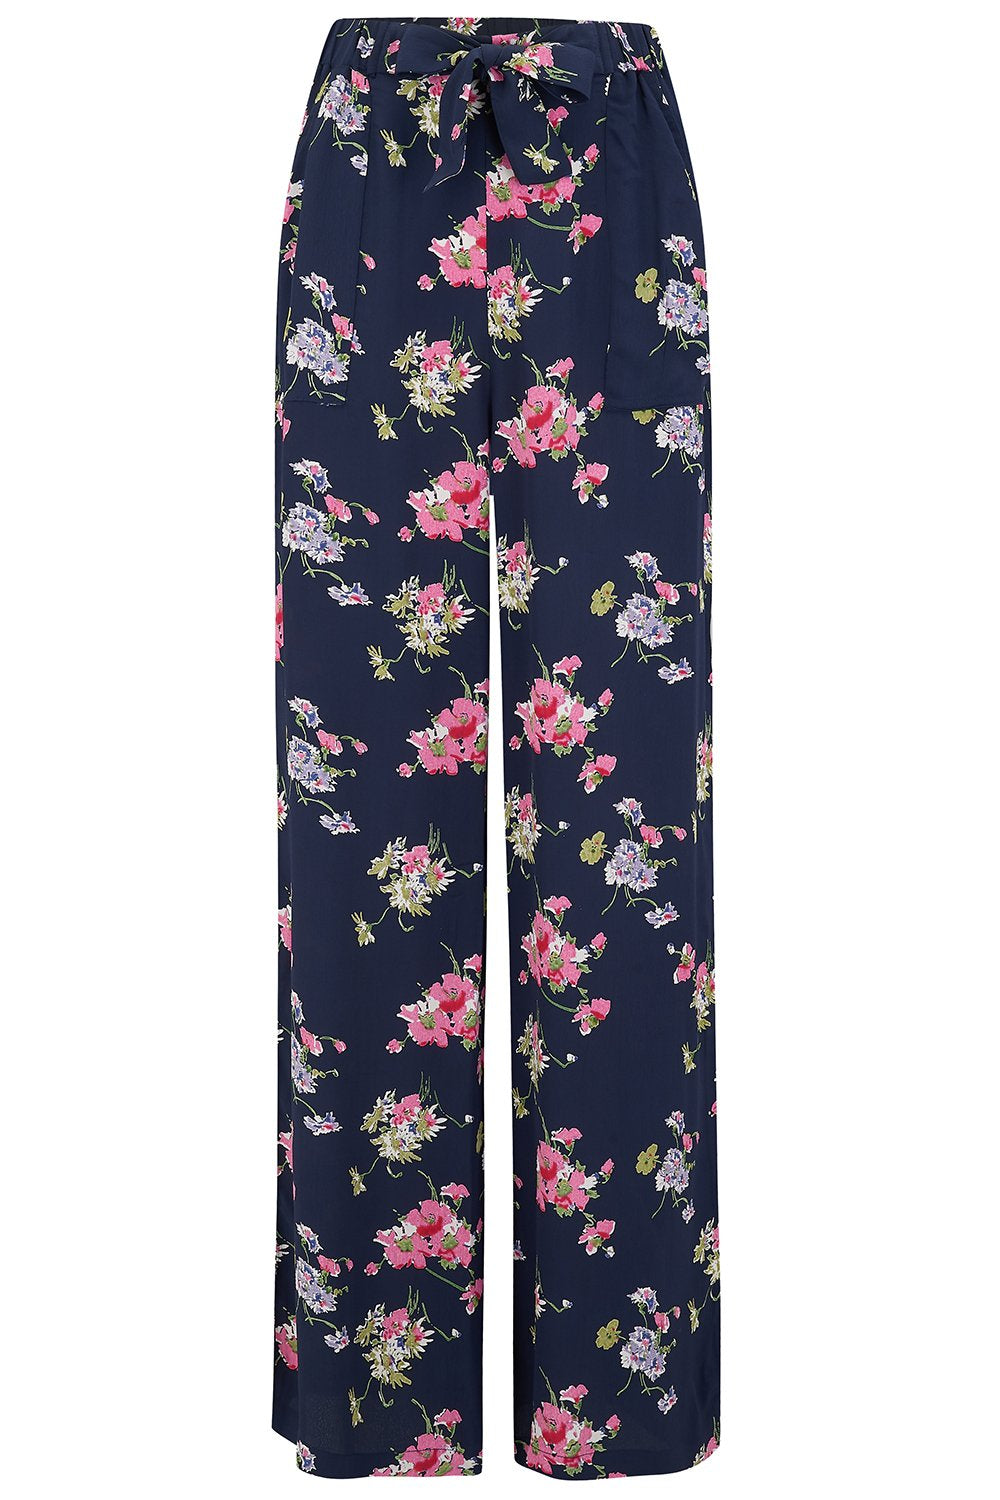 "Winnie" Wide Leg Loose Fit Trousers in Navy Mayflower Print, Classic 1940s Vintage Style - True and authentic vintage style clothing, inspired by the Classic styles of CC41 , WW2 and the fun 1950s RocknRoll era, for everyday wear plus events like Goodwood Revival, Twinwood Festival and Viva Las Vegas Rockabilly Weekend Rock n Romance The Seamstress Of Bloomsbury